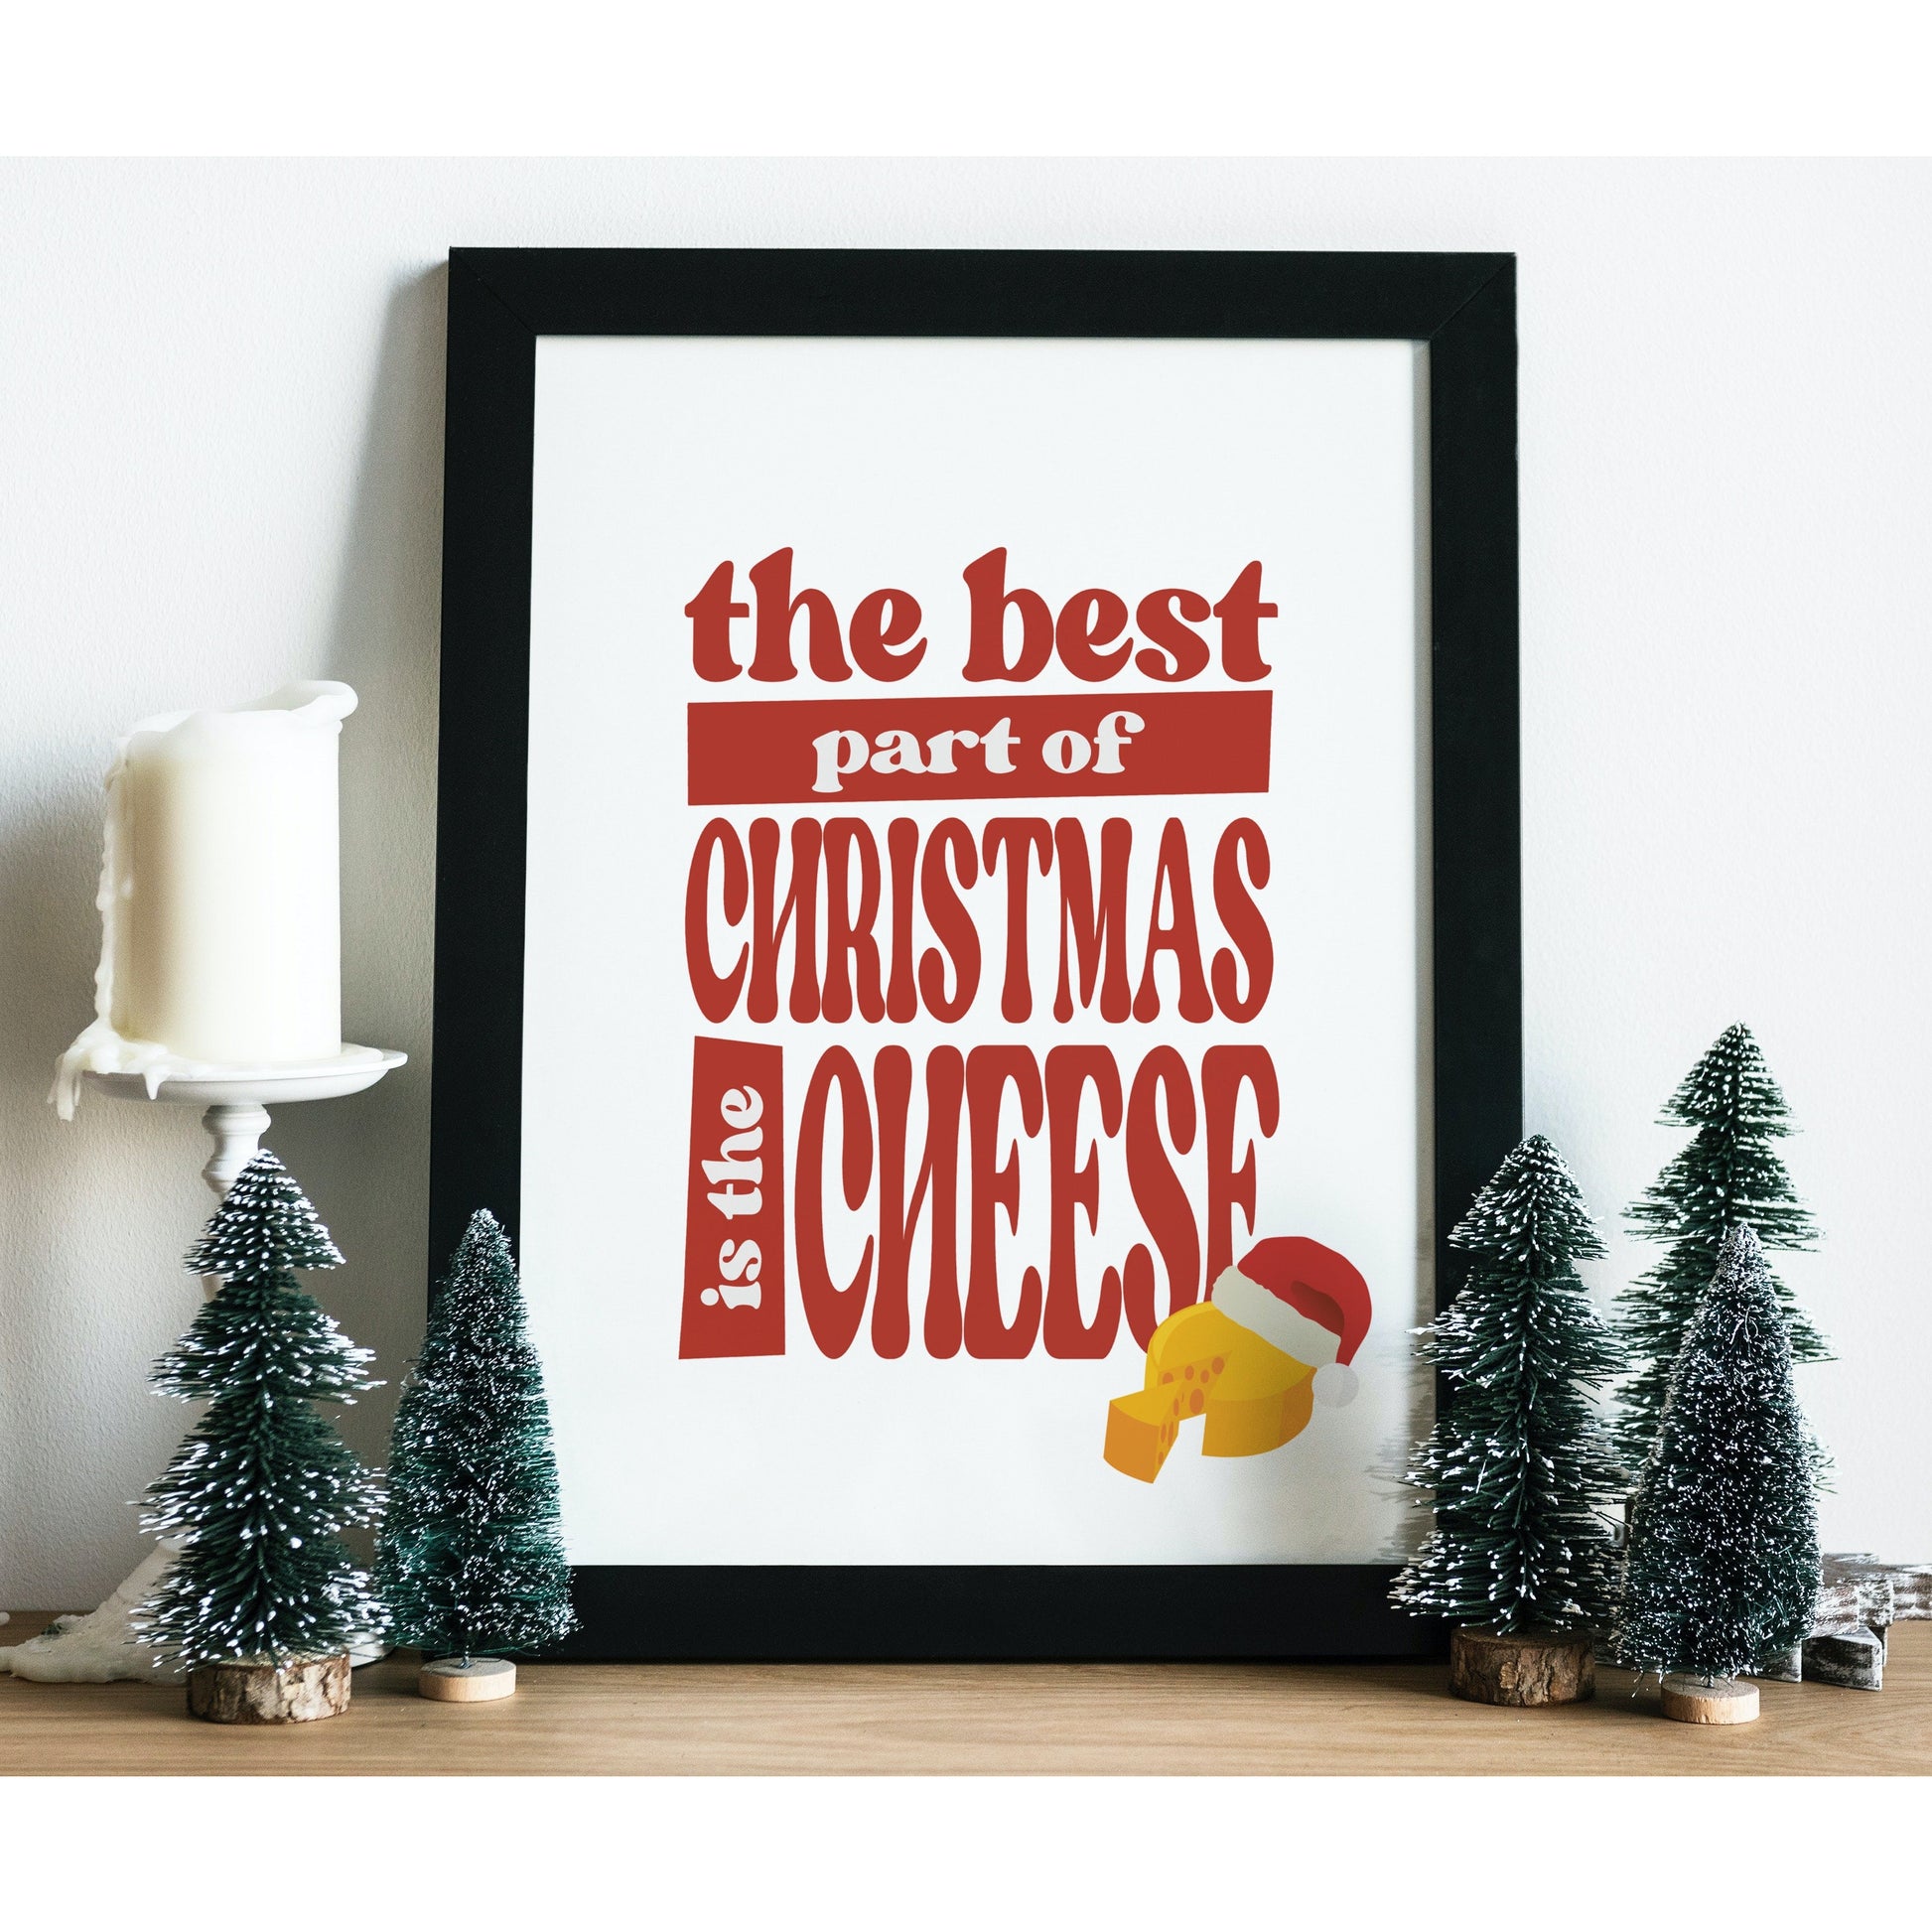 Christmas Cheese Quote Art Print Poster | Christmas gifts and ...